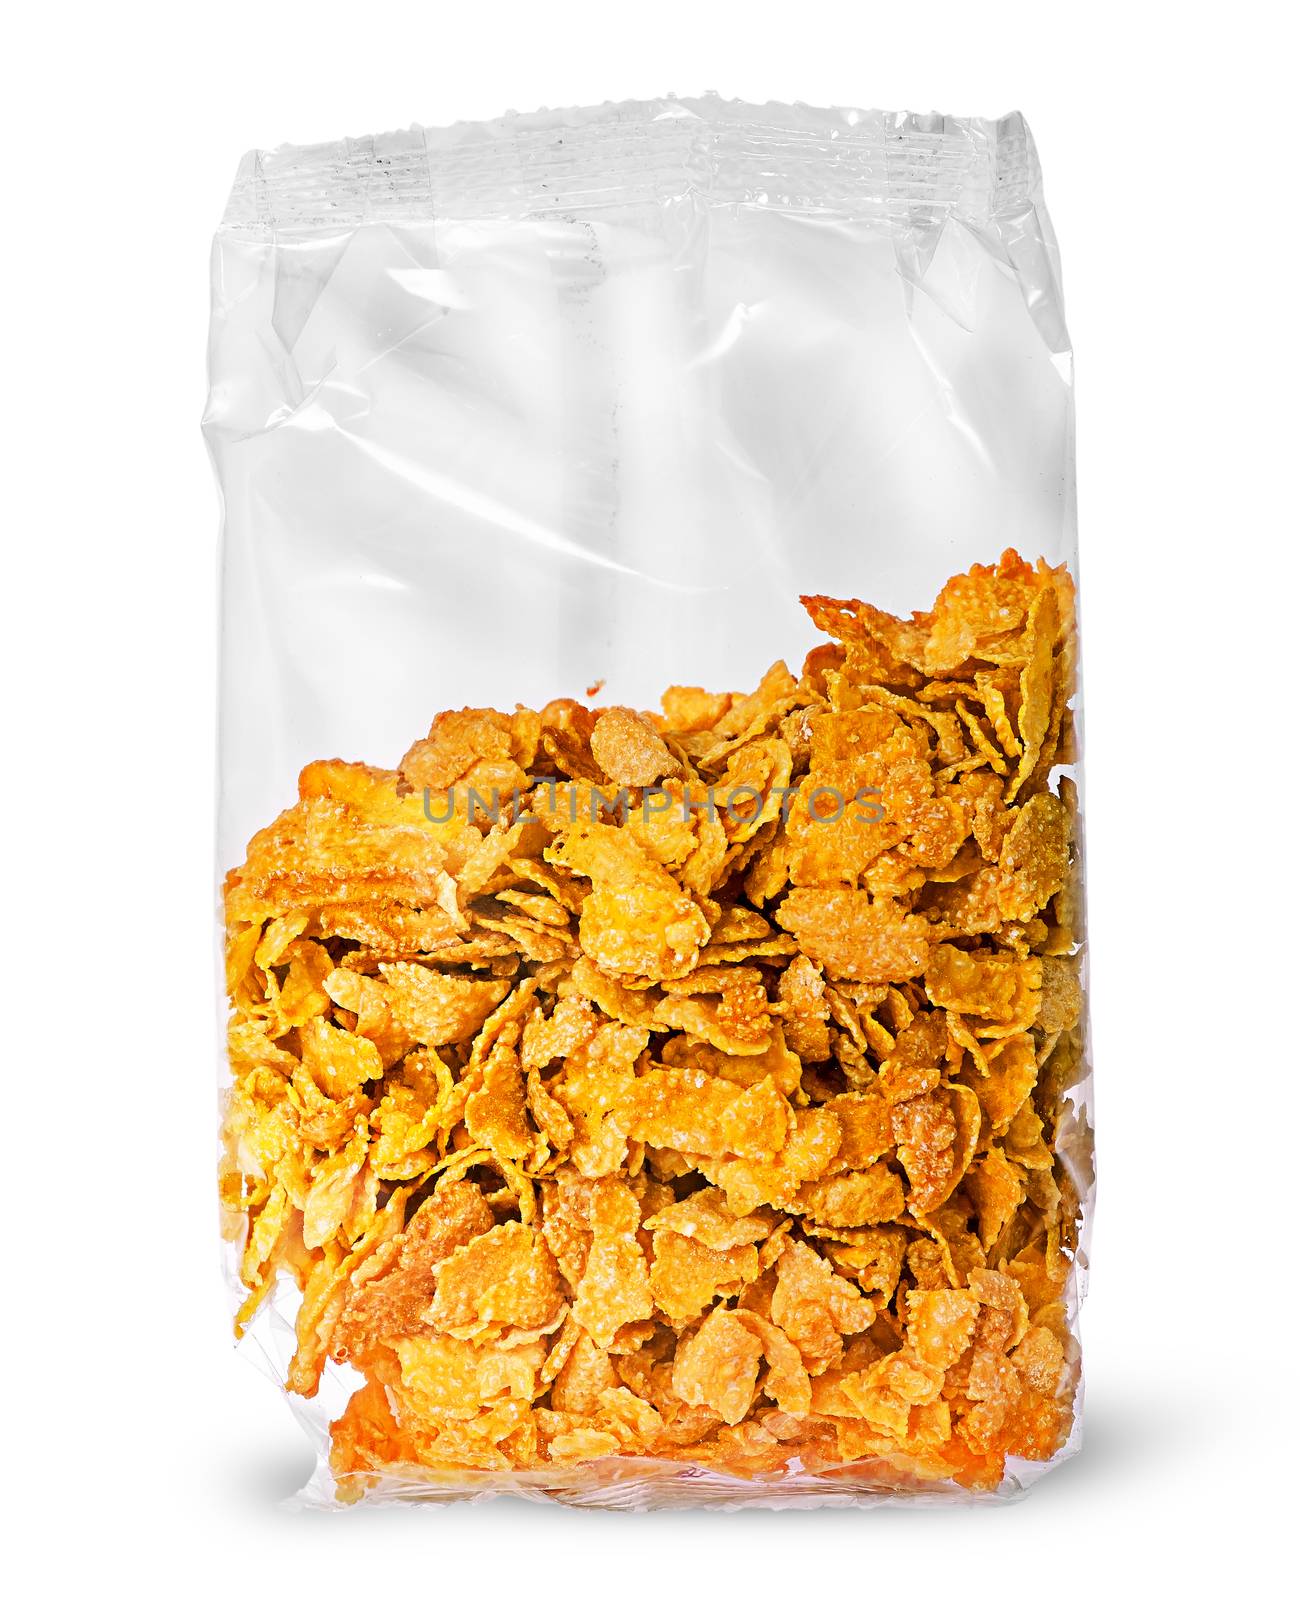 Sealed package of cornflakes vertically by Cipariss